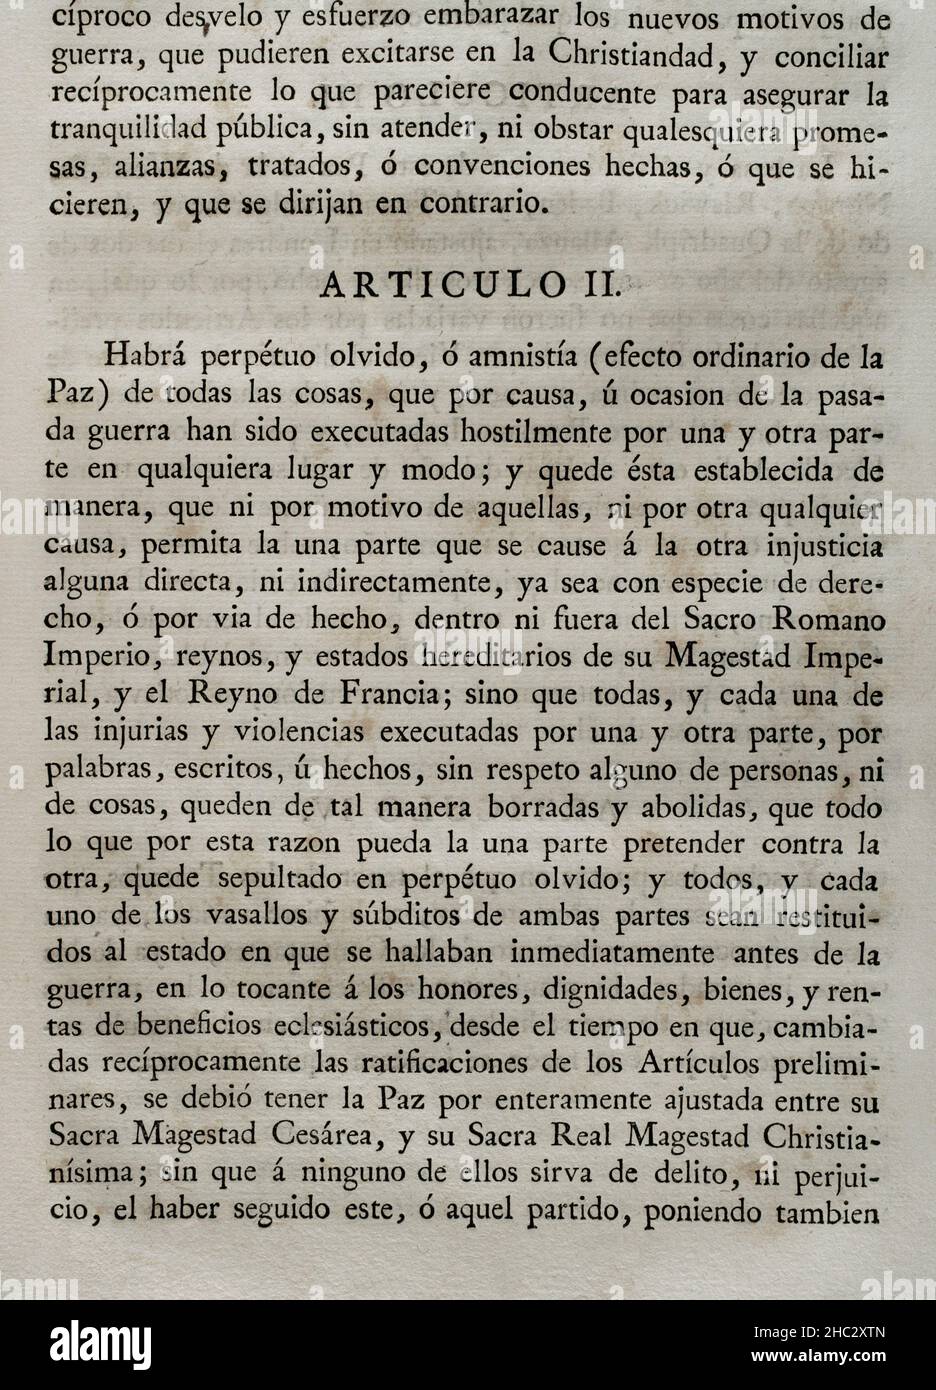 Accession by King Philip V of Spain to the Treaty of Vienna (18 November 1738) between Emperor Charles VI of Germany and Louis XV of France to end the War of the Polish Succession (1733-1738). Spain acceded the following year, signing at Versailles on 21 April 1739. It was ratified by King Philip V at Aranjuez the following 13 May. Article II (on perpetual oblivion or amnesty for wartime events). Collection of the Treaties of Peace, Alliance, Commerce adjusted by the Crown of Spain with the Foreign Powers (Colección de los Tratados de Paz, Alianza, Comercio ajustados por la Corona de España co Stock Photo